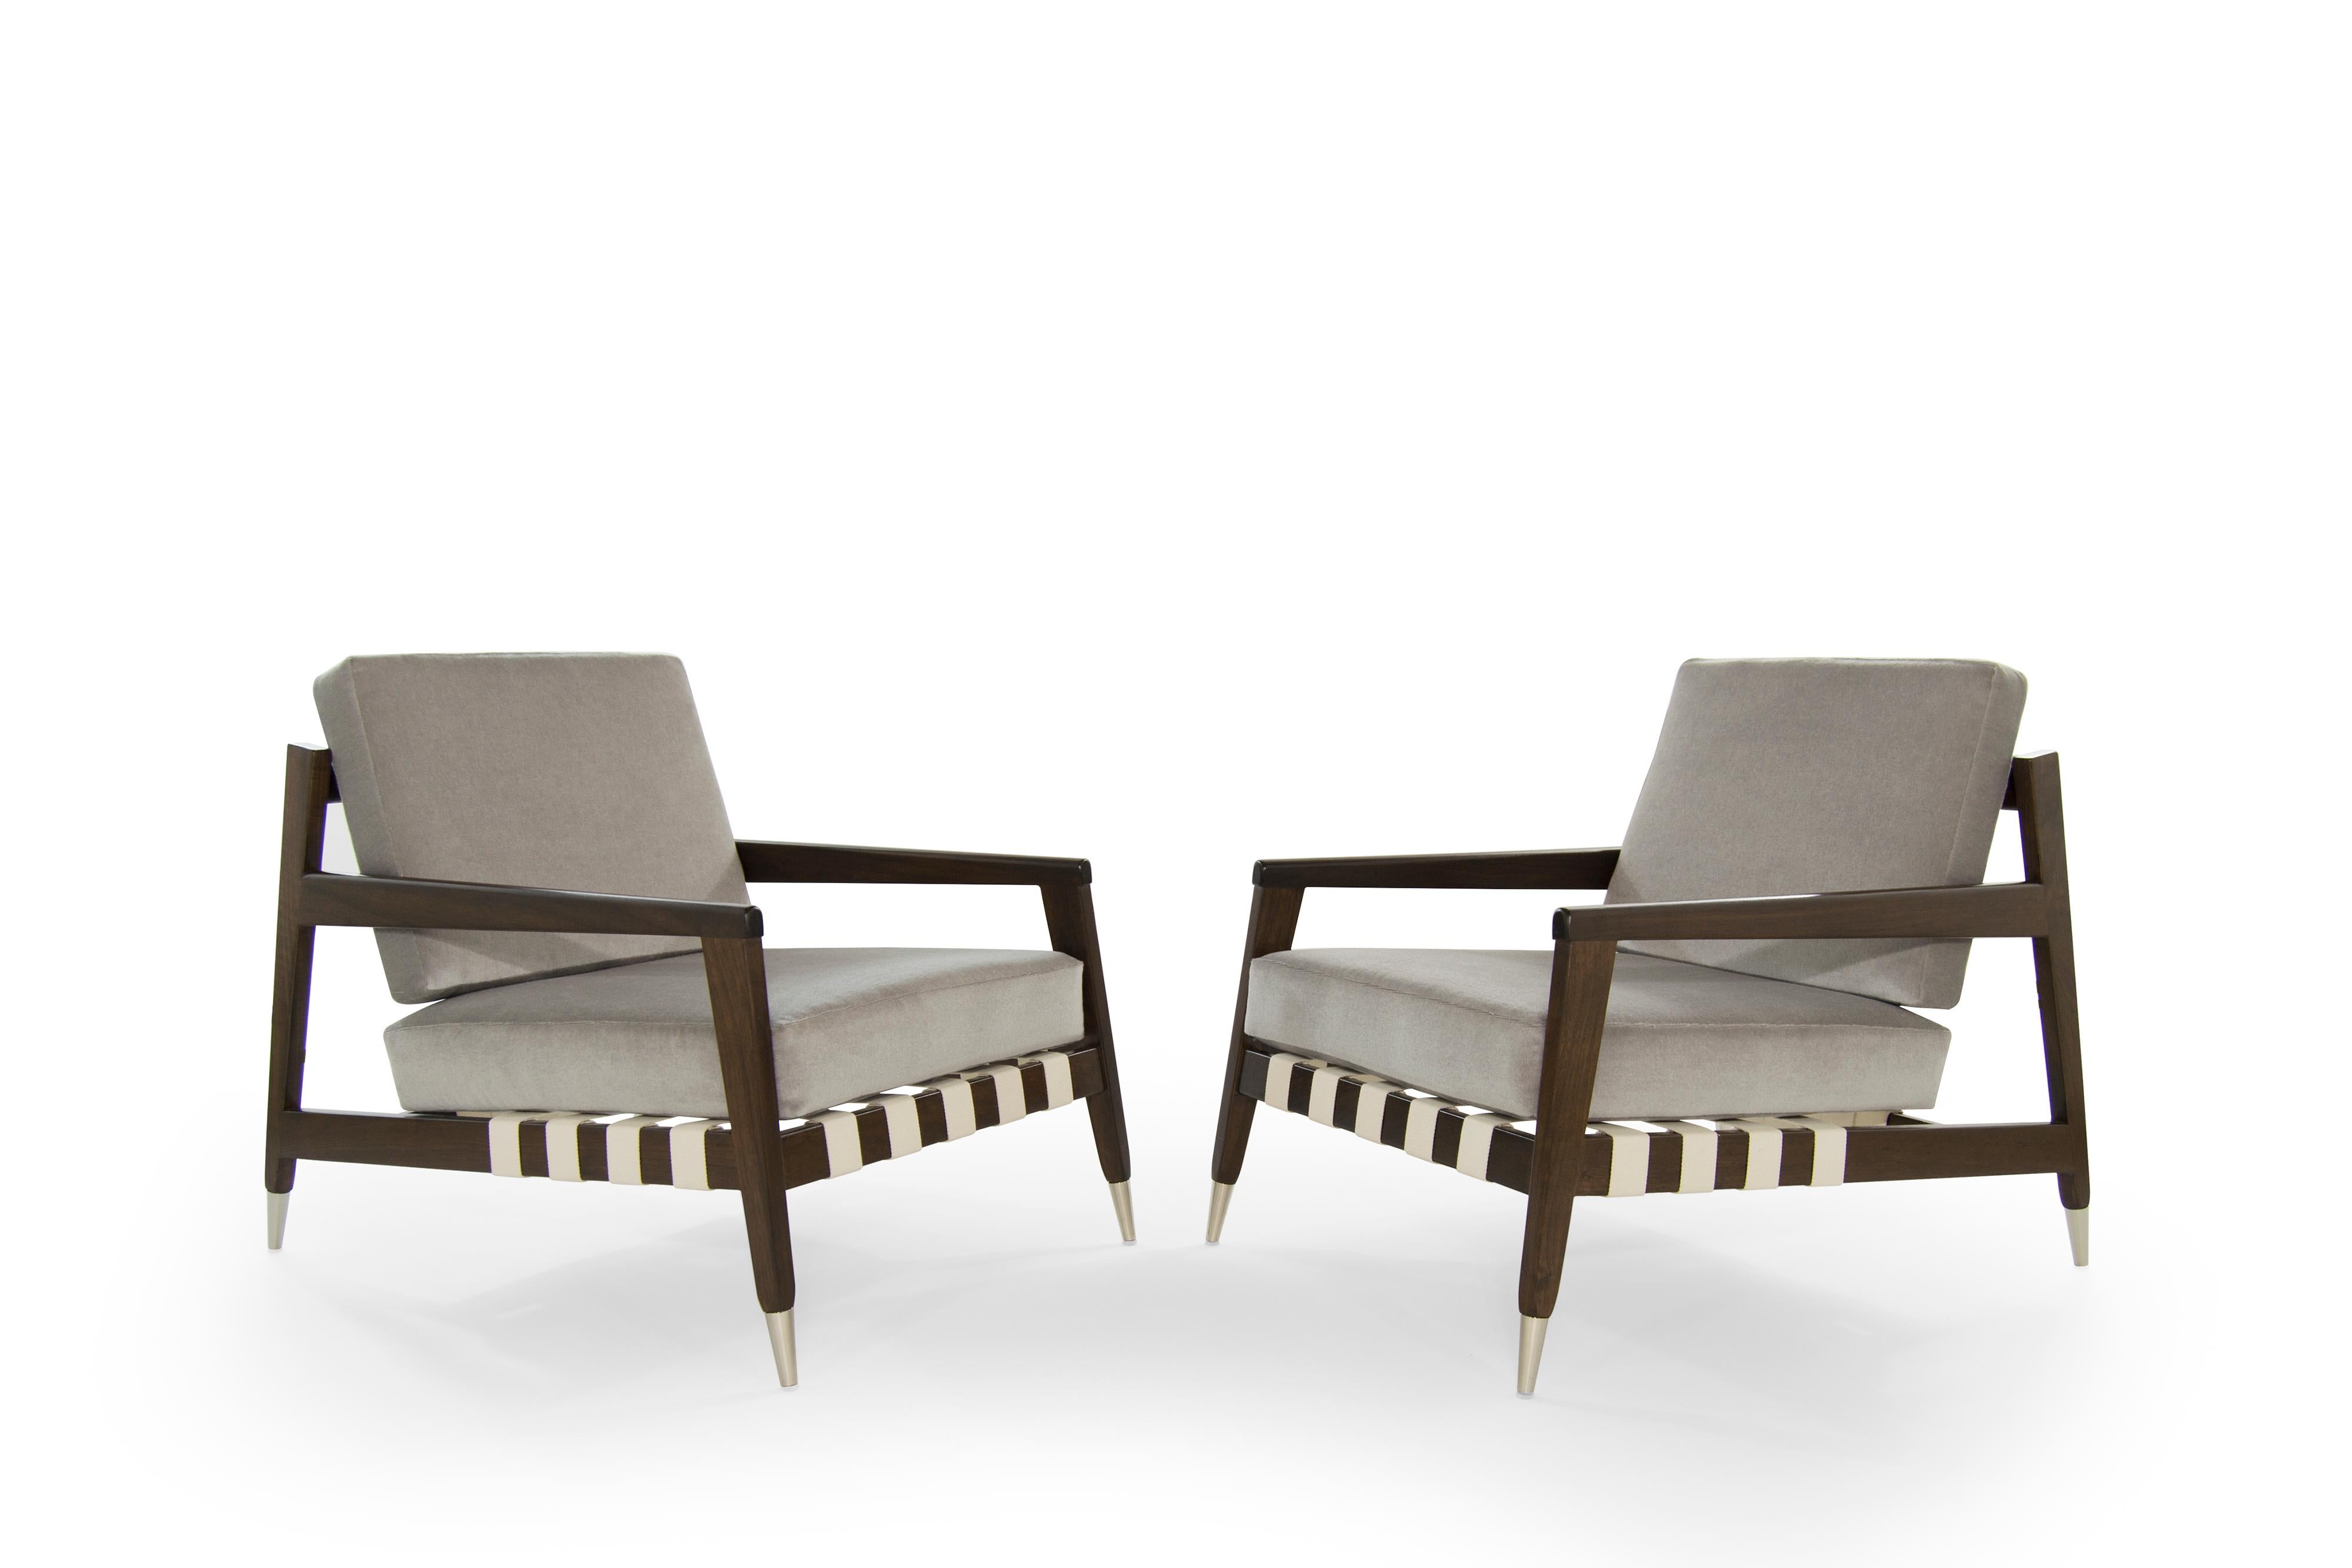 Mid-Century Modern Rare Edmond Spence Strapped Lounge Chairs, 1950s